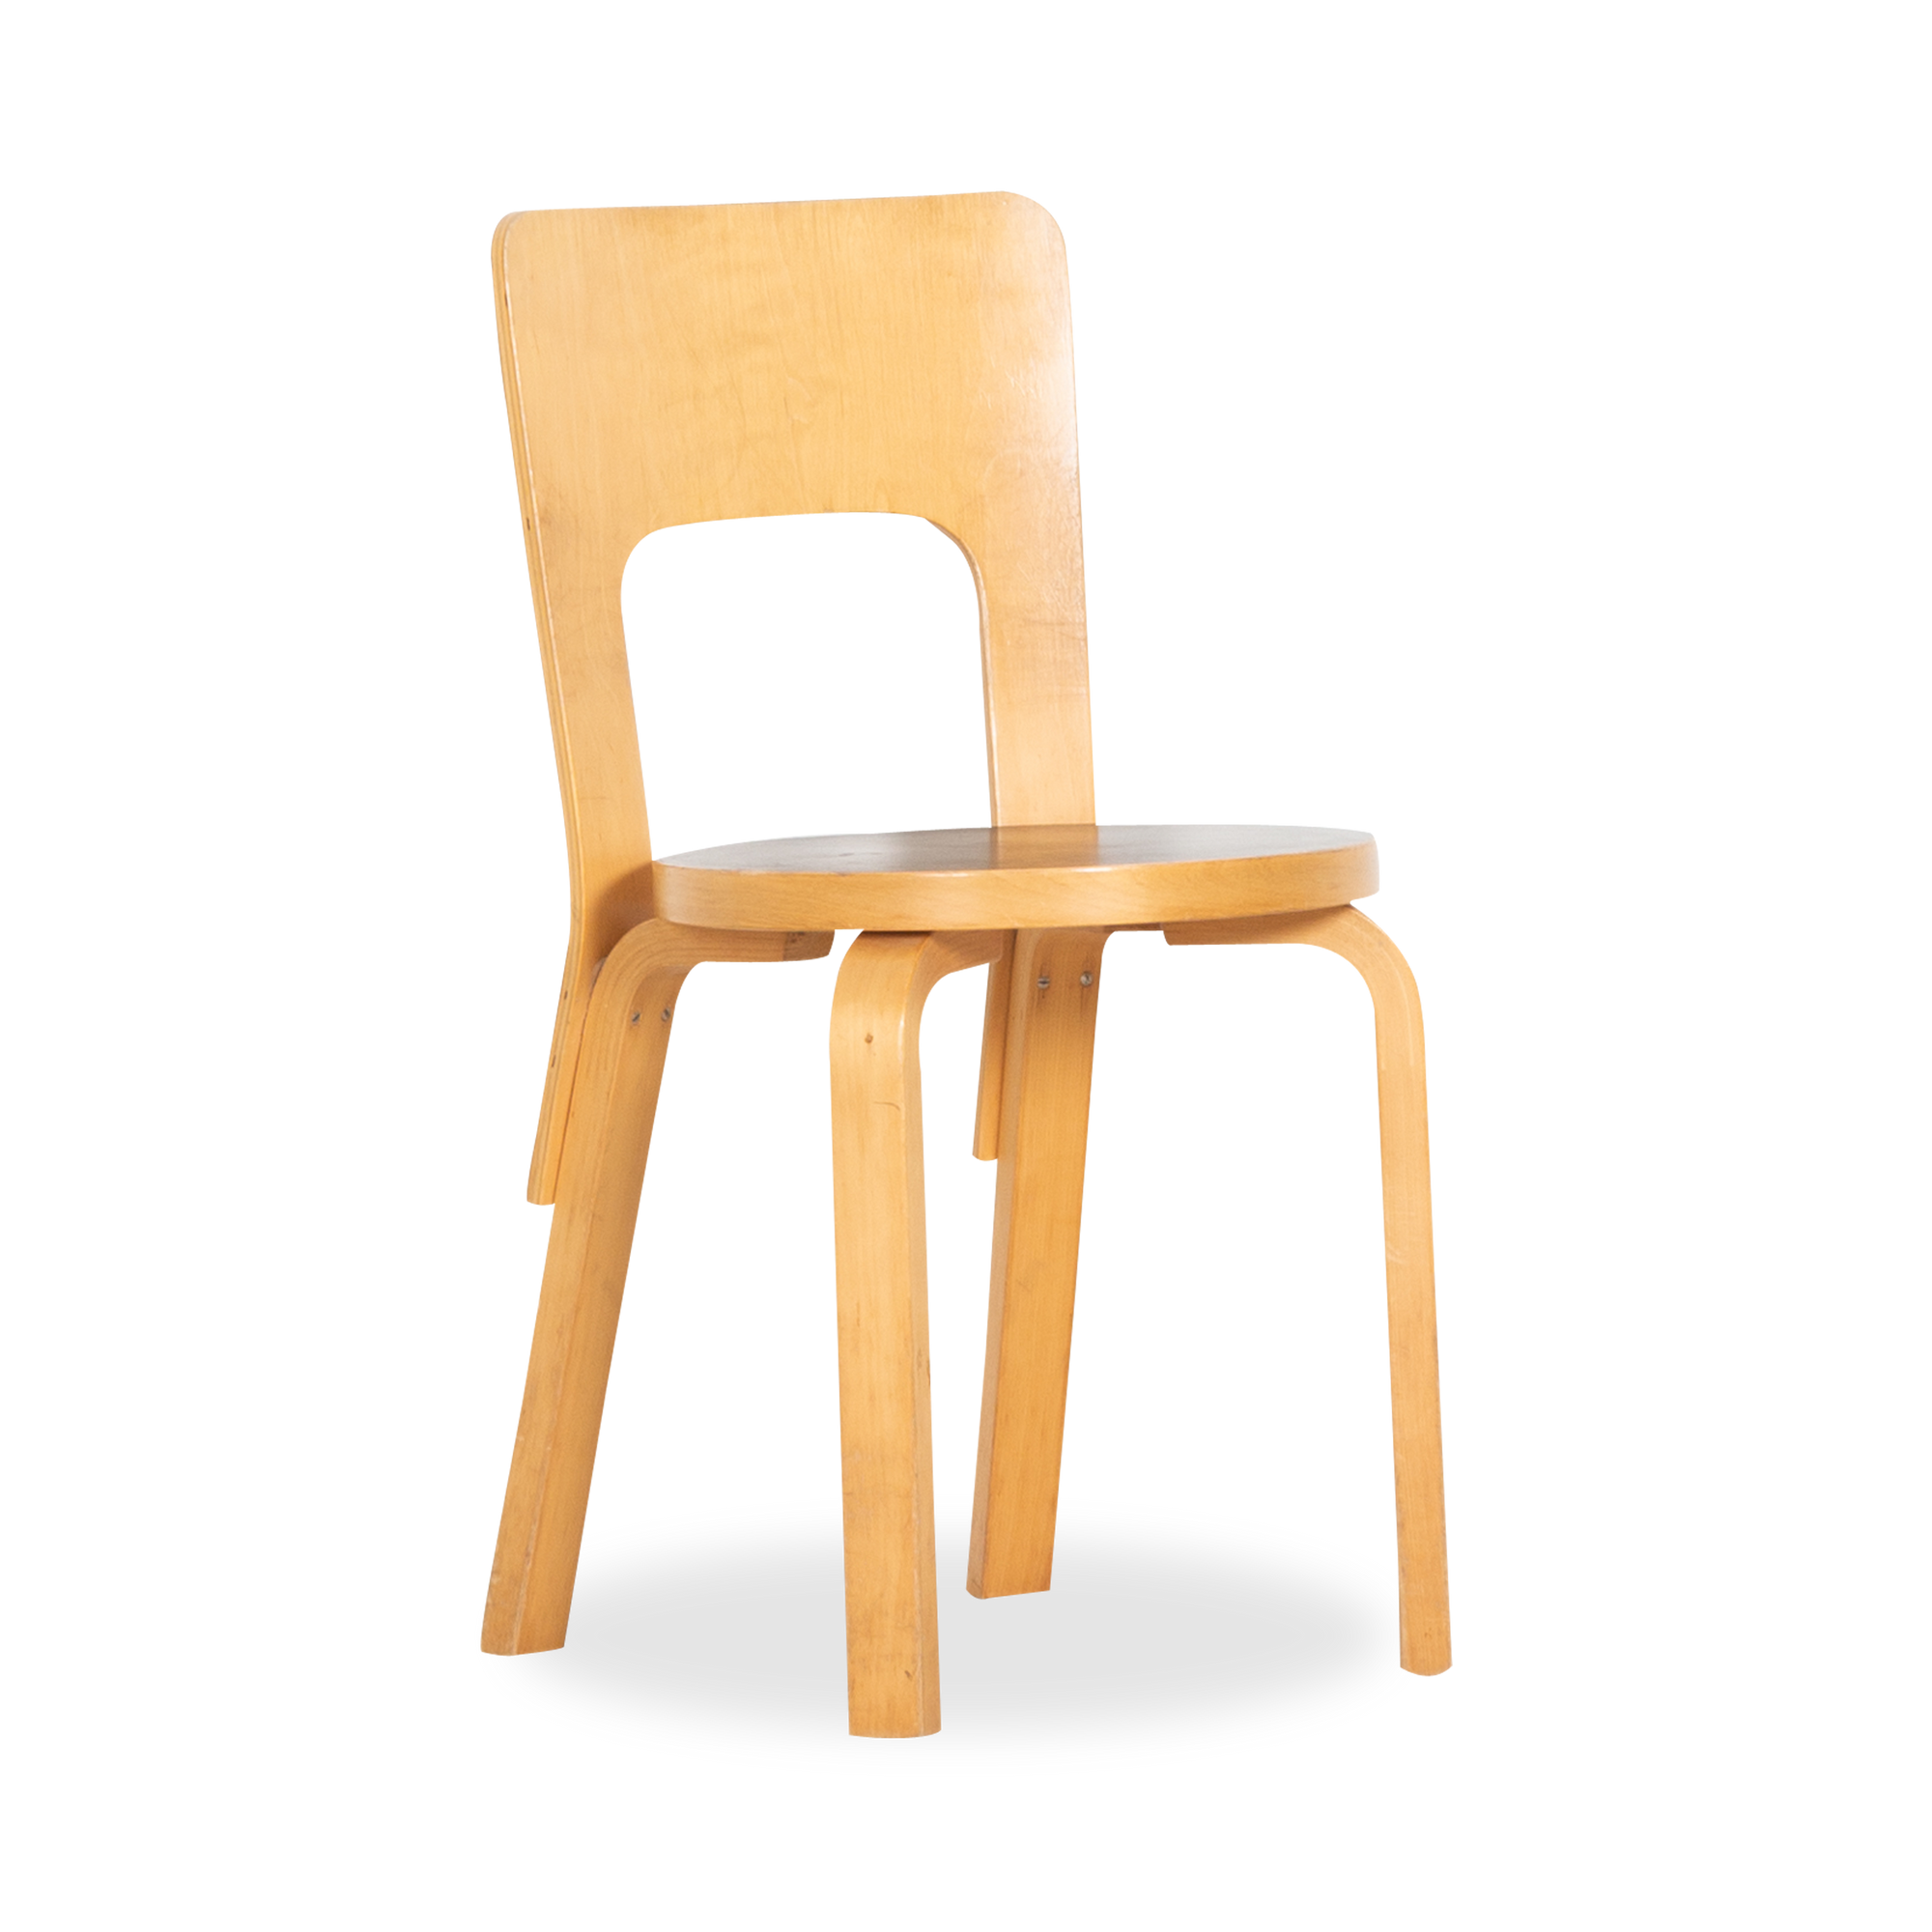 An icon of Scandinavian design, this vintage MD66 Chair was designed by Alvar Aalto and manufactured by Artek, circa 1960s.